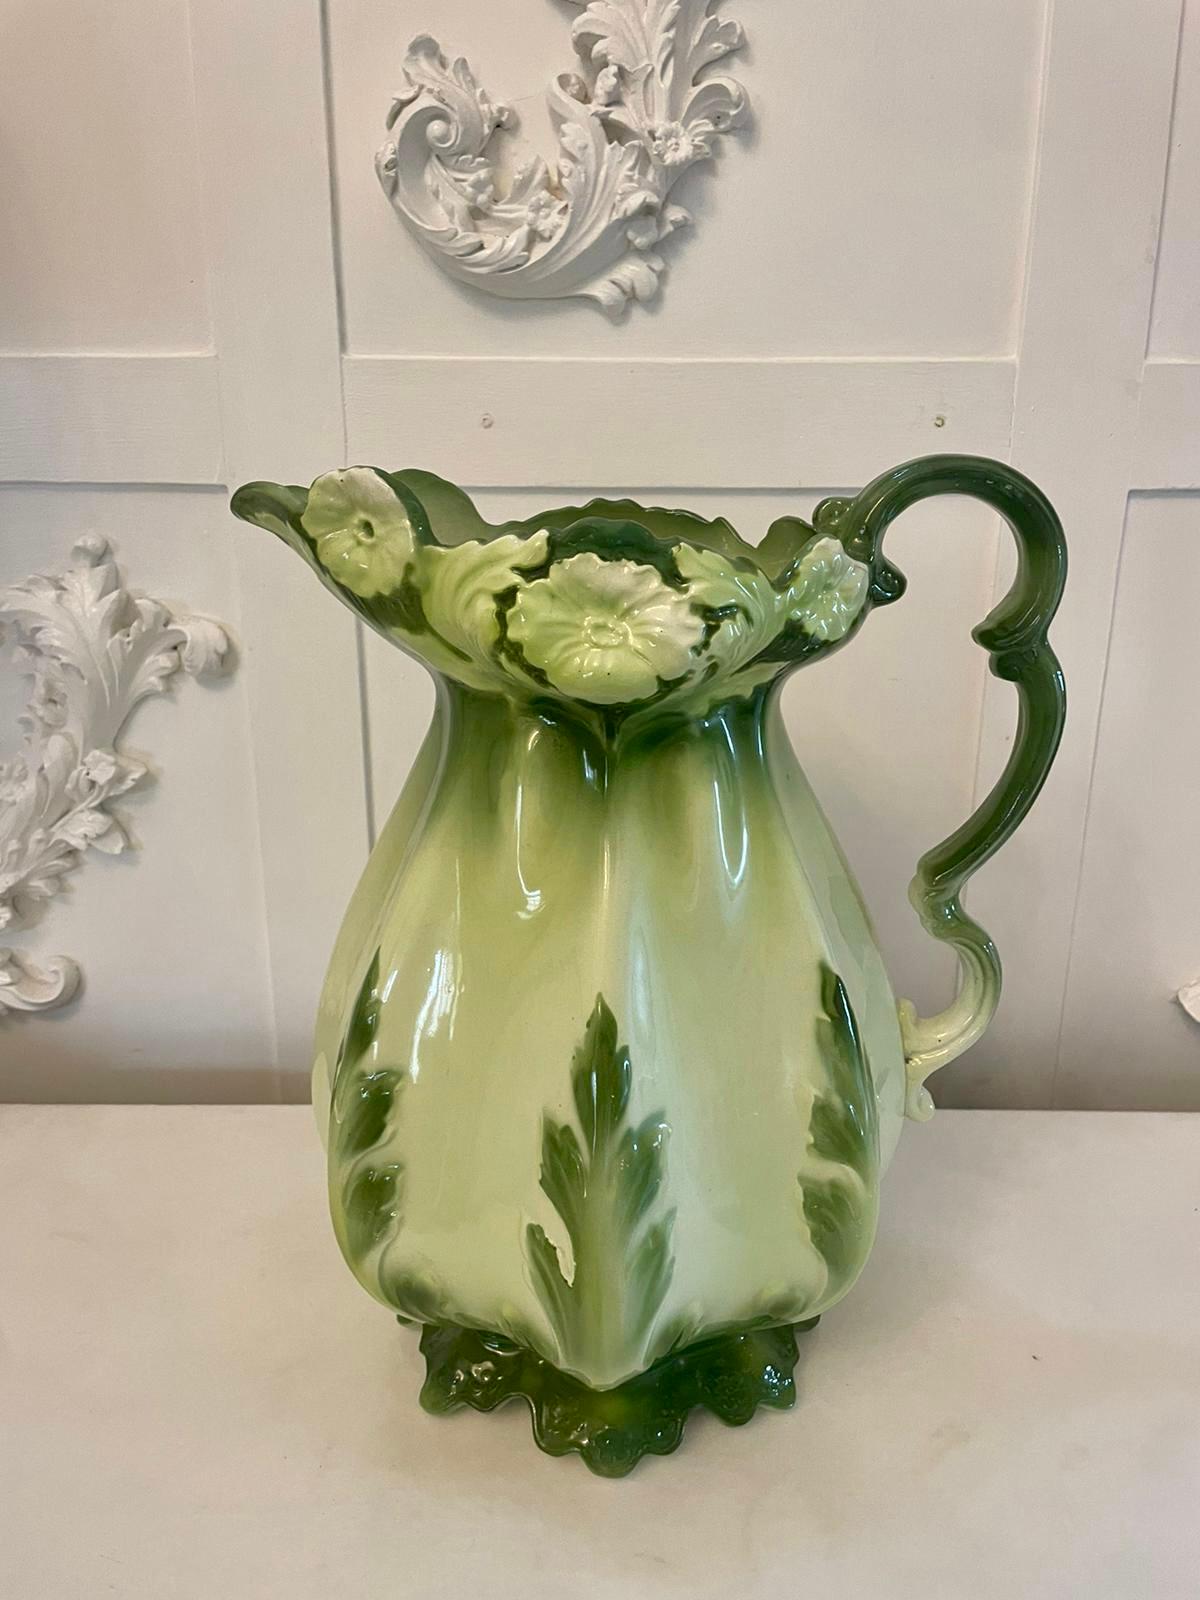 Fantastic original antique art nouveau quality jug and bowl set in wonderful light and dark green colours in perfect condition

Beautifully crafted boasting lovely vibrant colours

Dimensions:
Jug H 33.5 x W 28 x D 21 cm (13.18 x 11.02 x 8.2